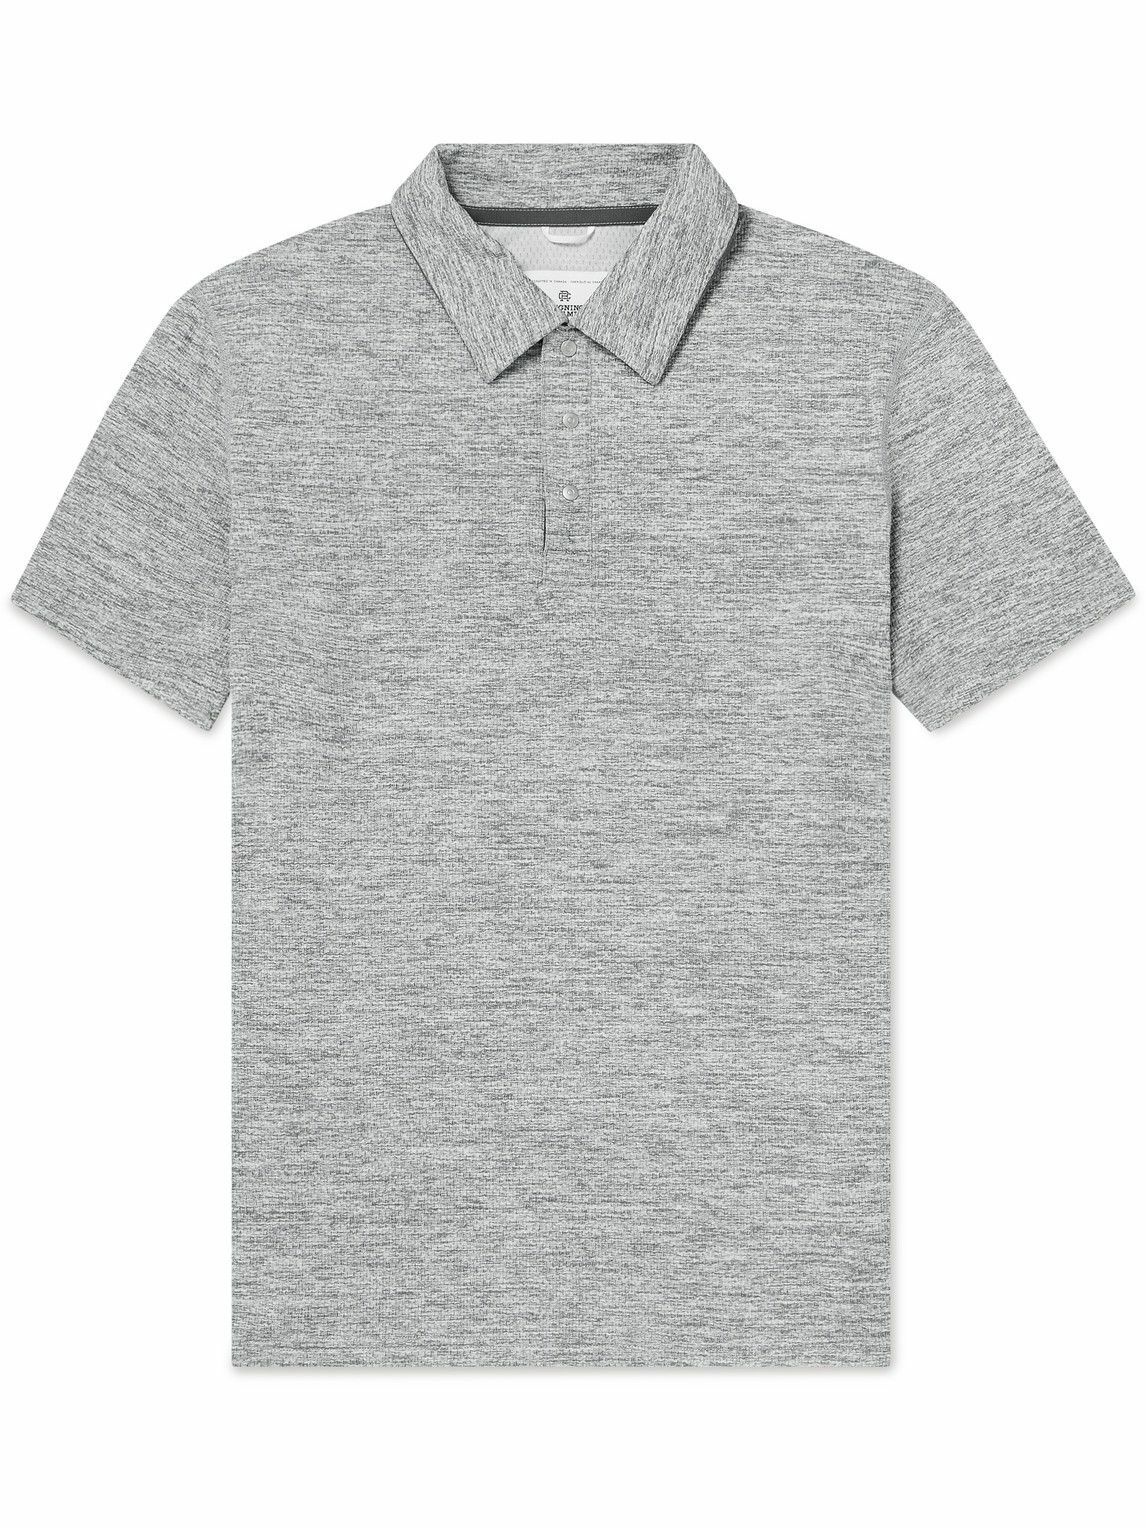 Reigning Champ - Solotex® Mesh Polo Shirt - Gray Reigning Champ